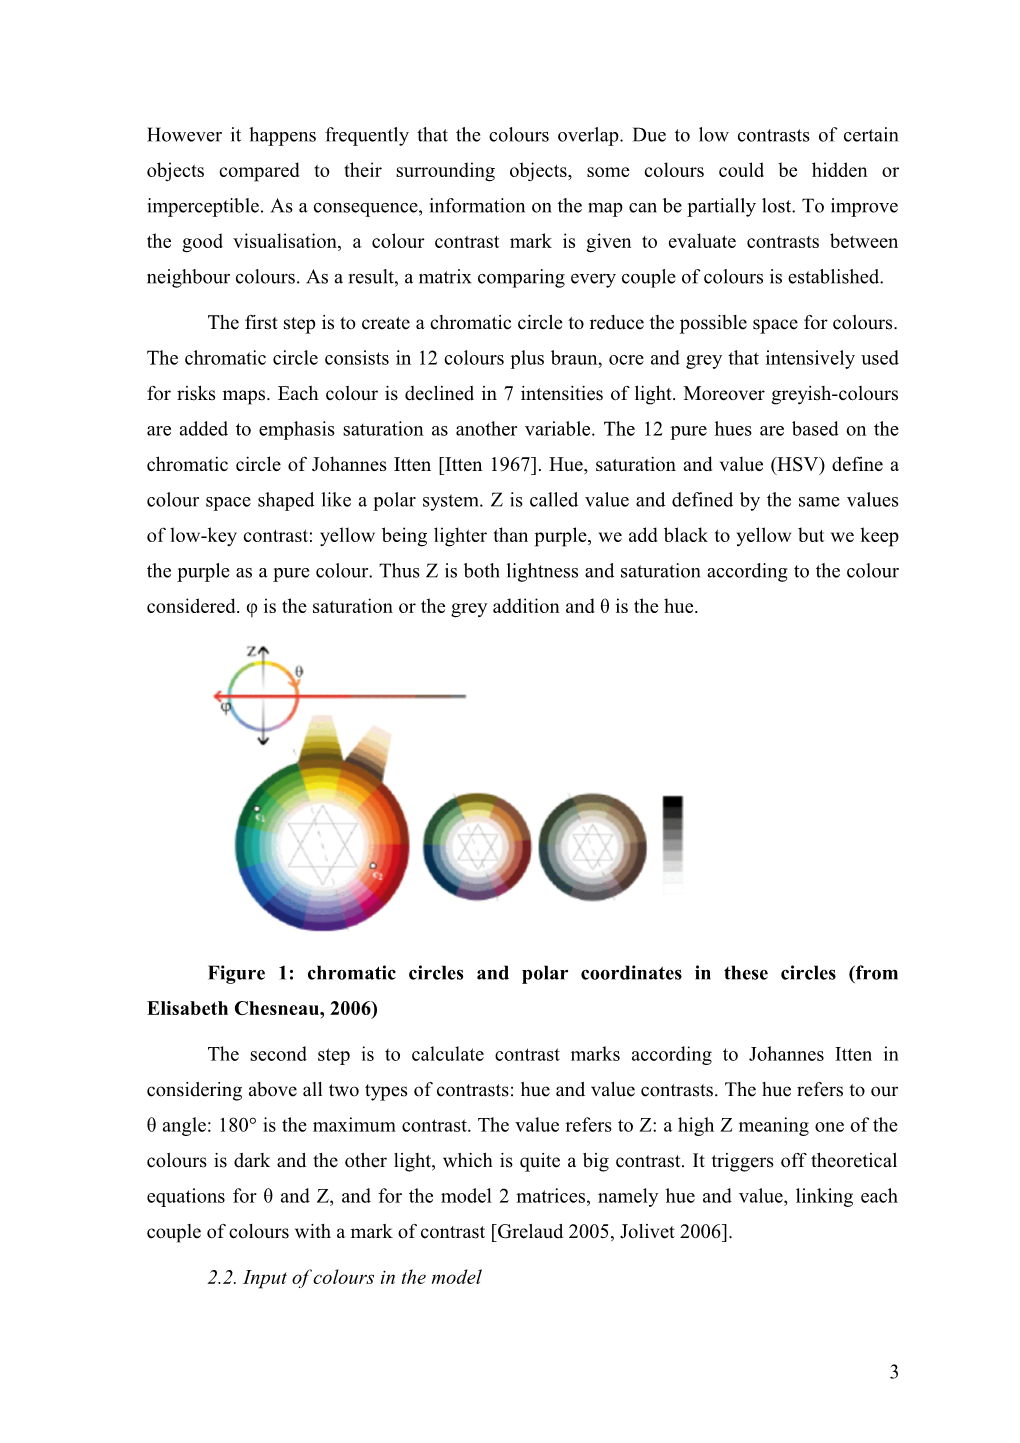 Outline of the Article of Colours